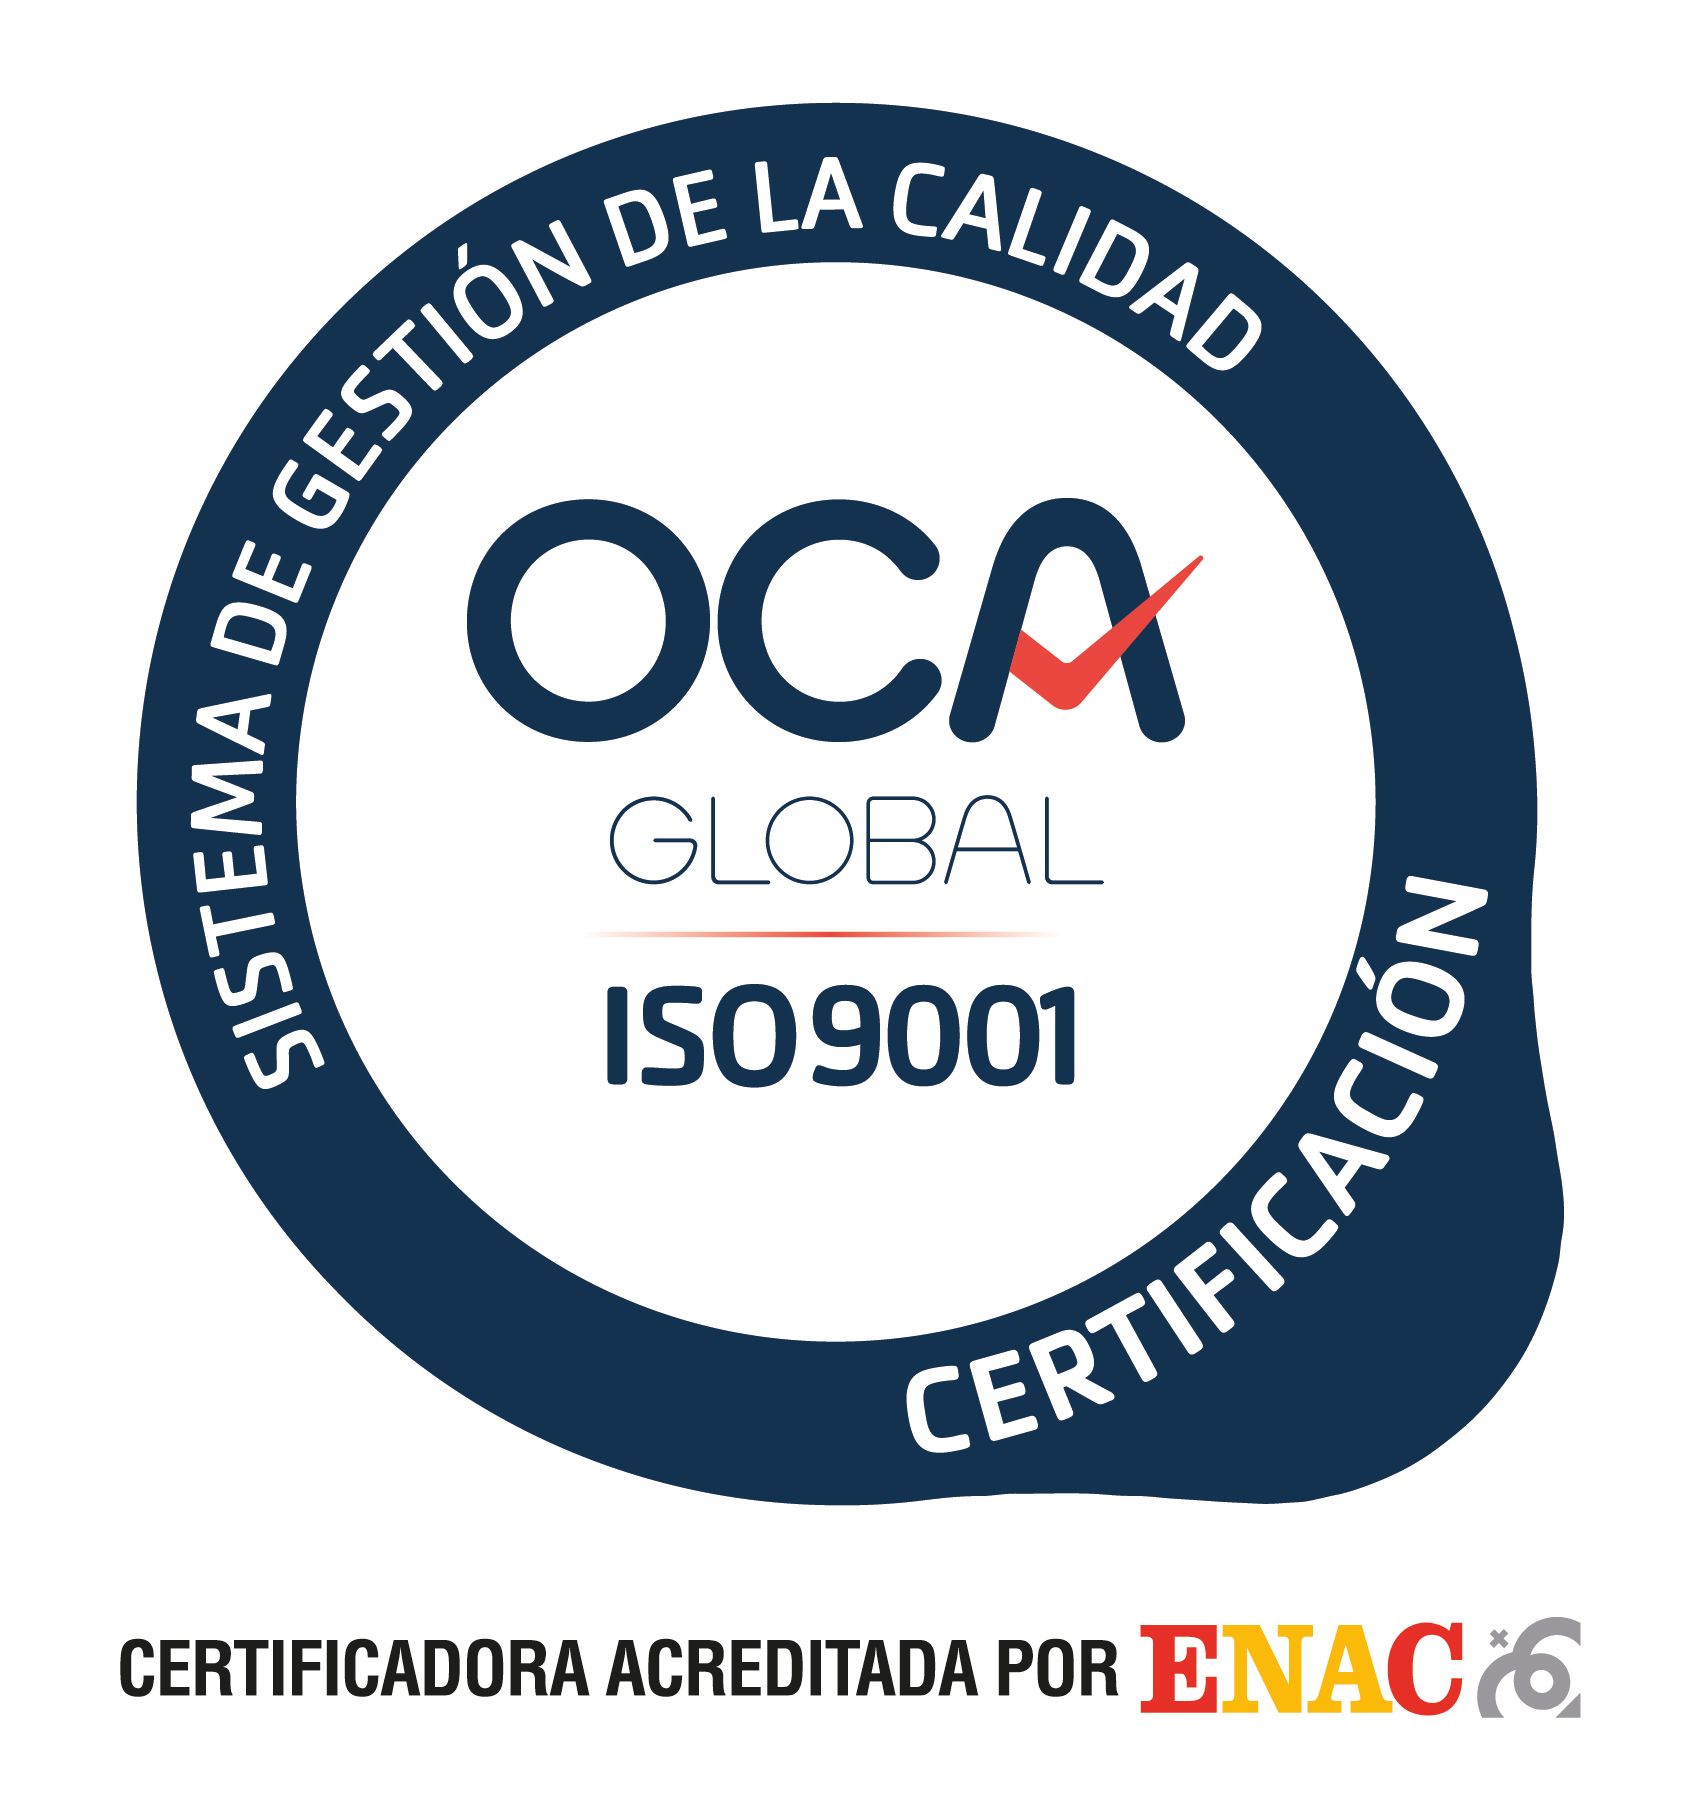 Certification of the quality management system in accordance with the UNE-EN ISO 9001:2015 standard